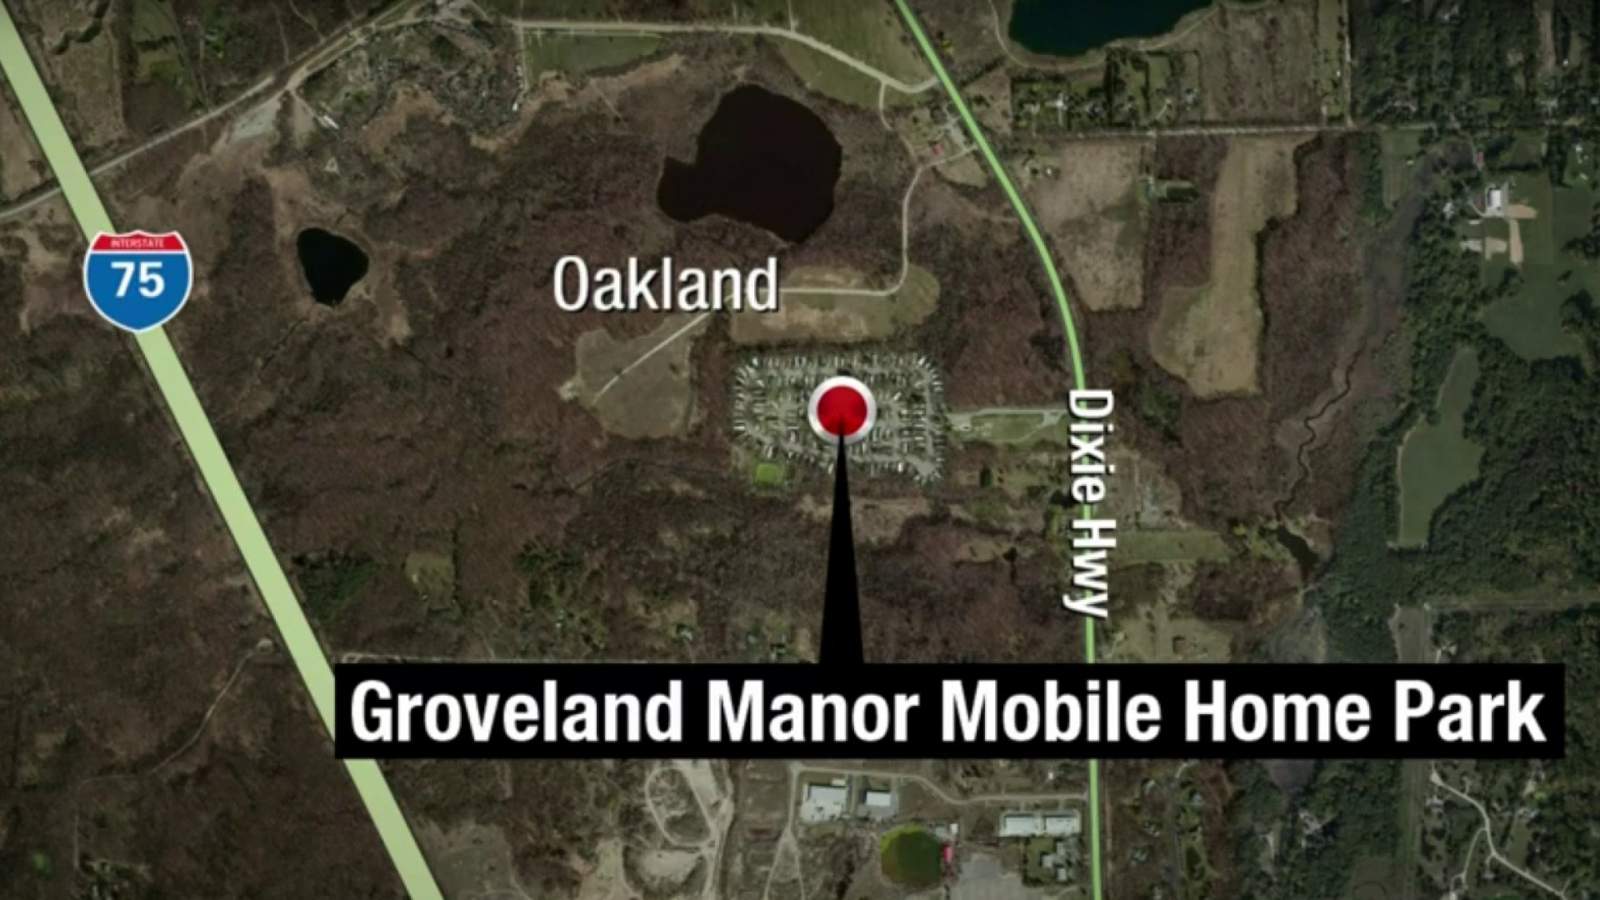 Michigan State Police investigating death of 3-year-old in Oakland County